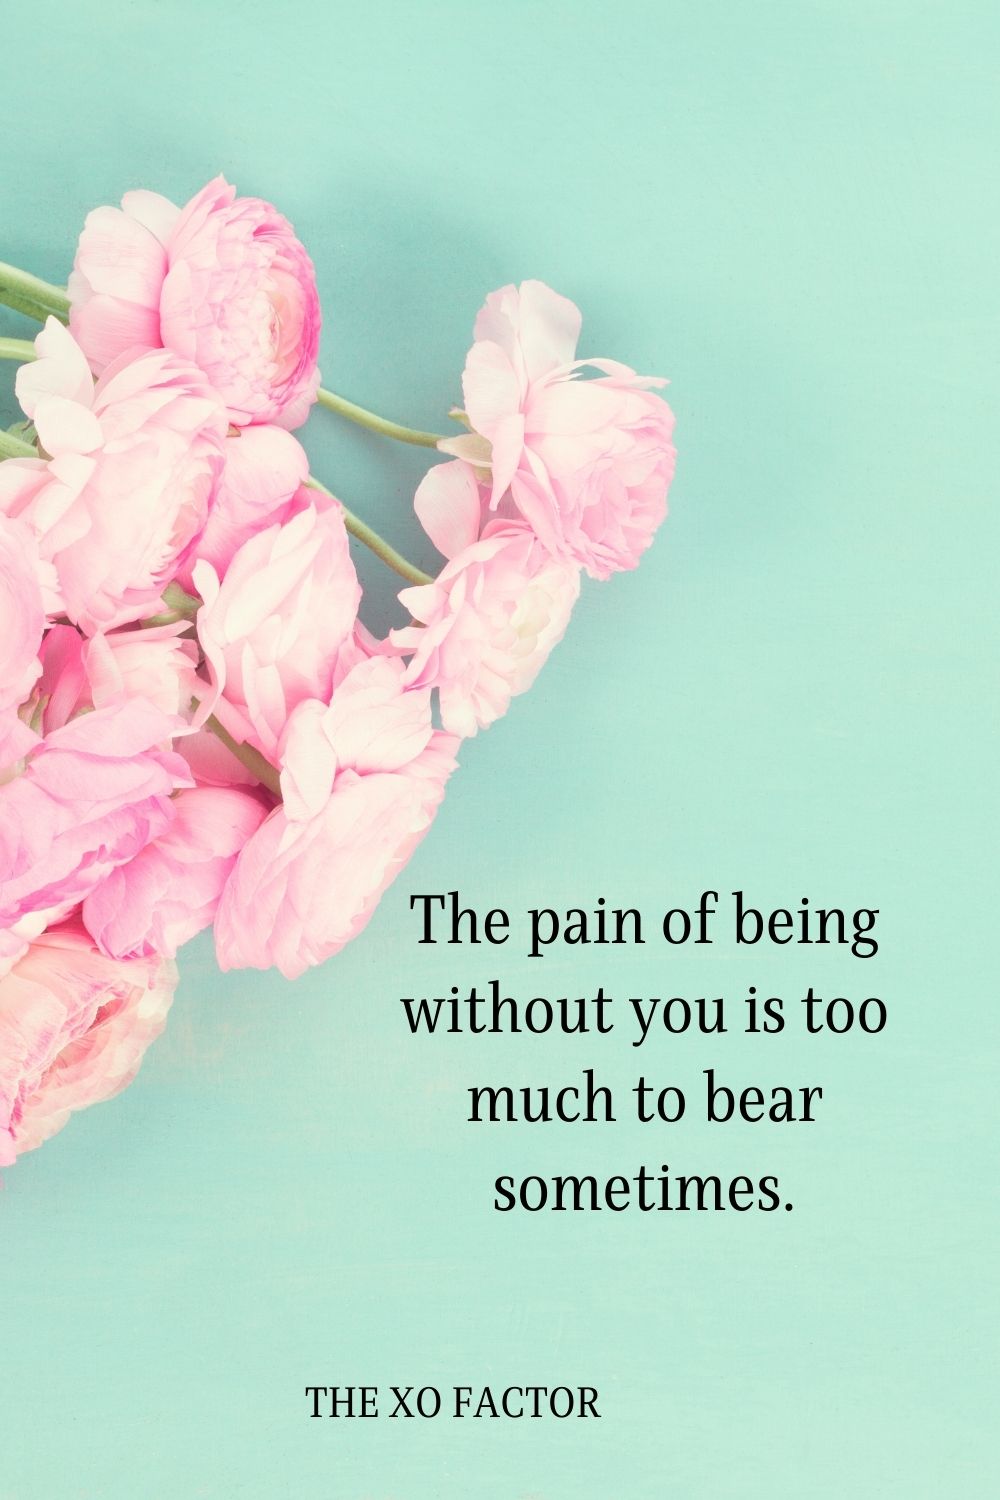 The pain of being without you is too much to bear sometimes.